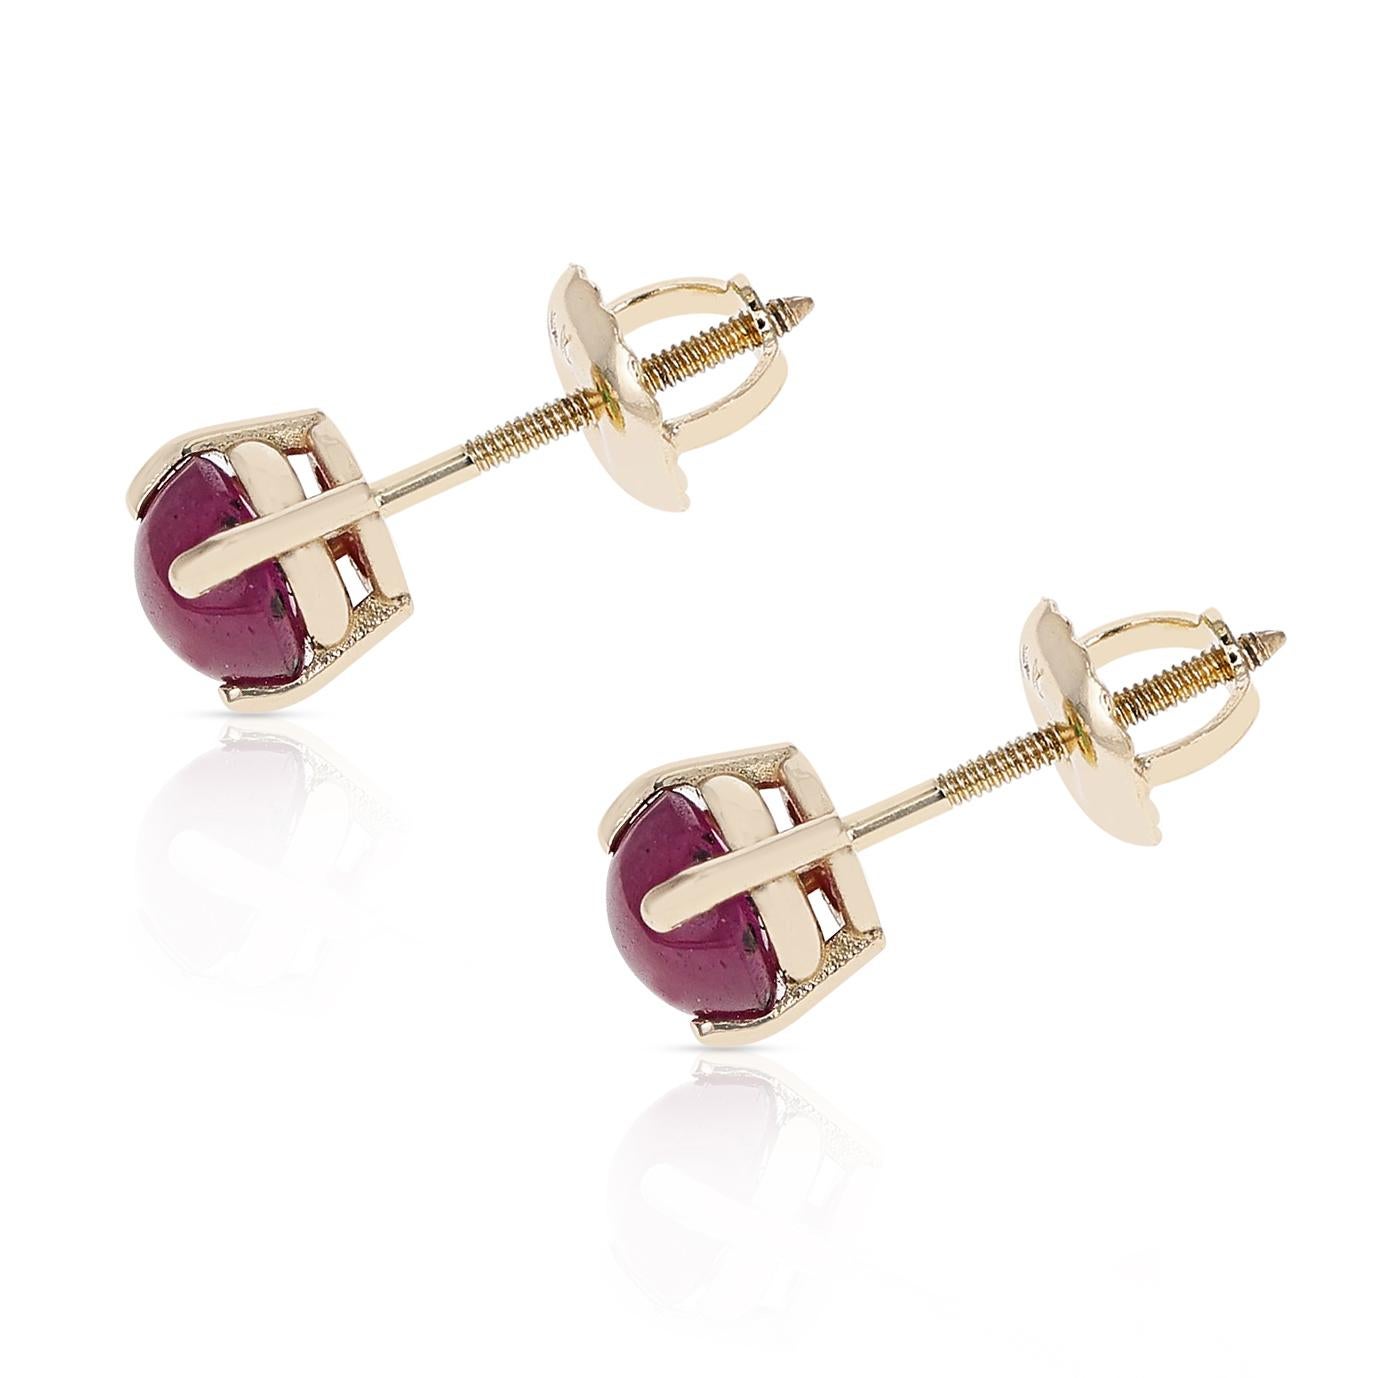 A pair of 4MM Ruby Round Cabochon Stud Earrings made in 14 Karat Yellow Gold. The total stone weight ranges from approximately 0.83 - 1.06 carats.